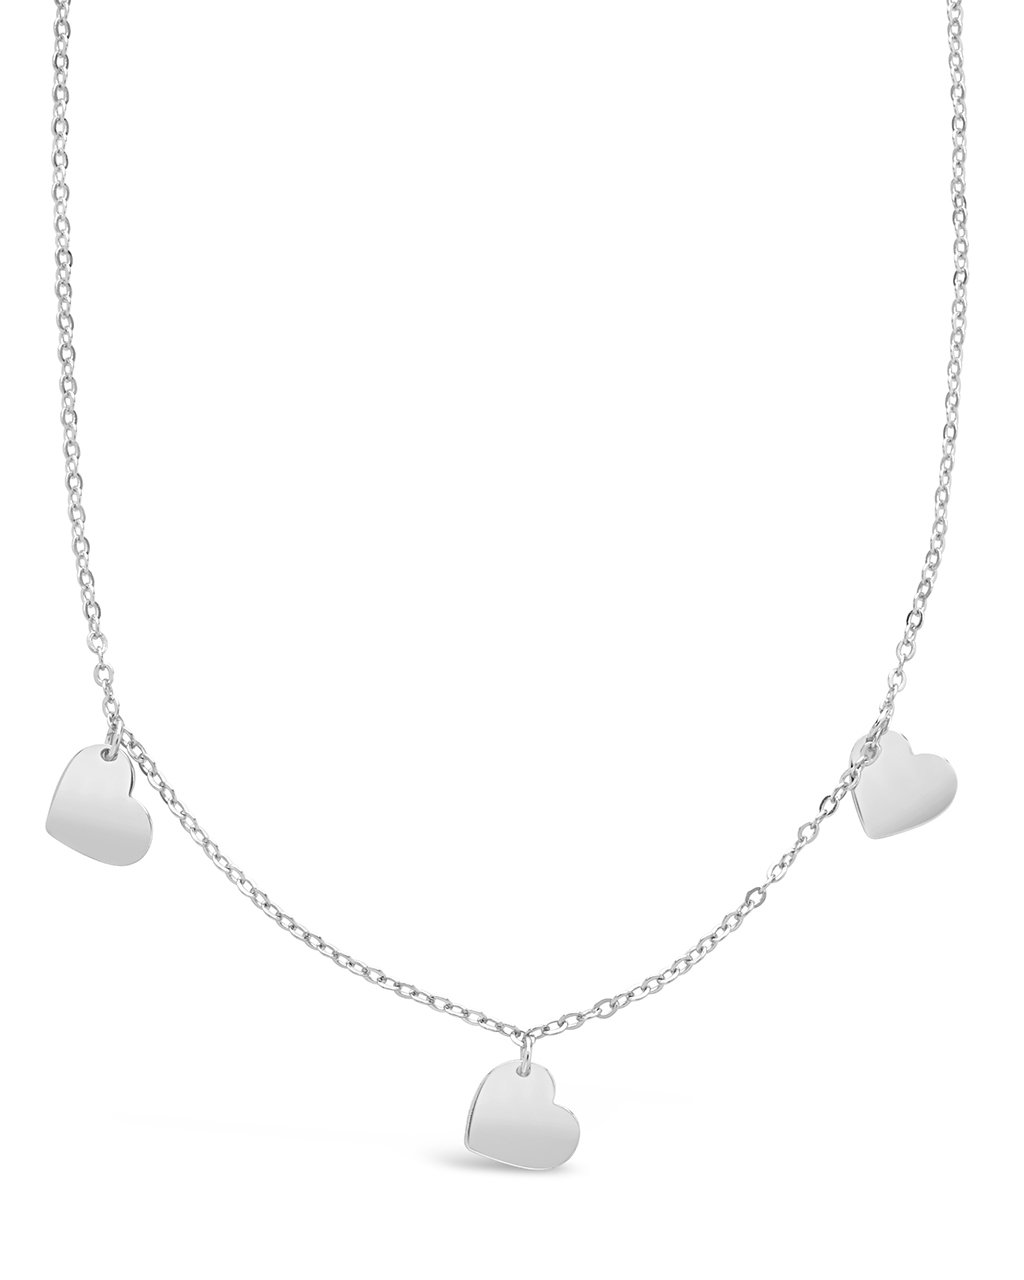 Heart Charm Necklace - Sterling Forever